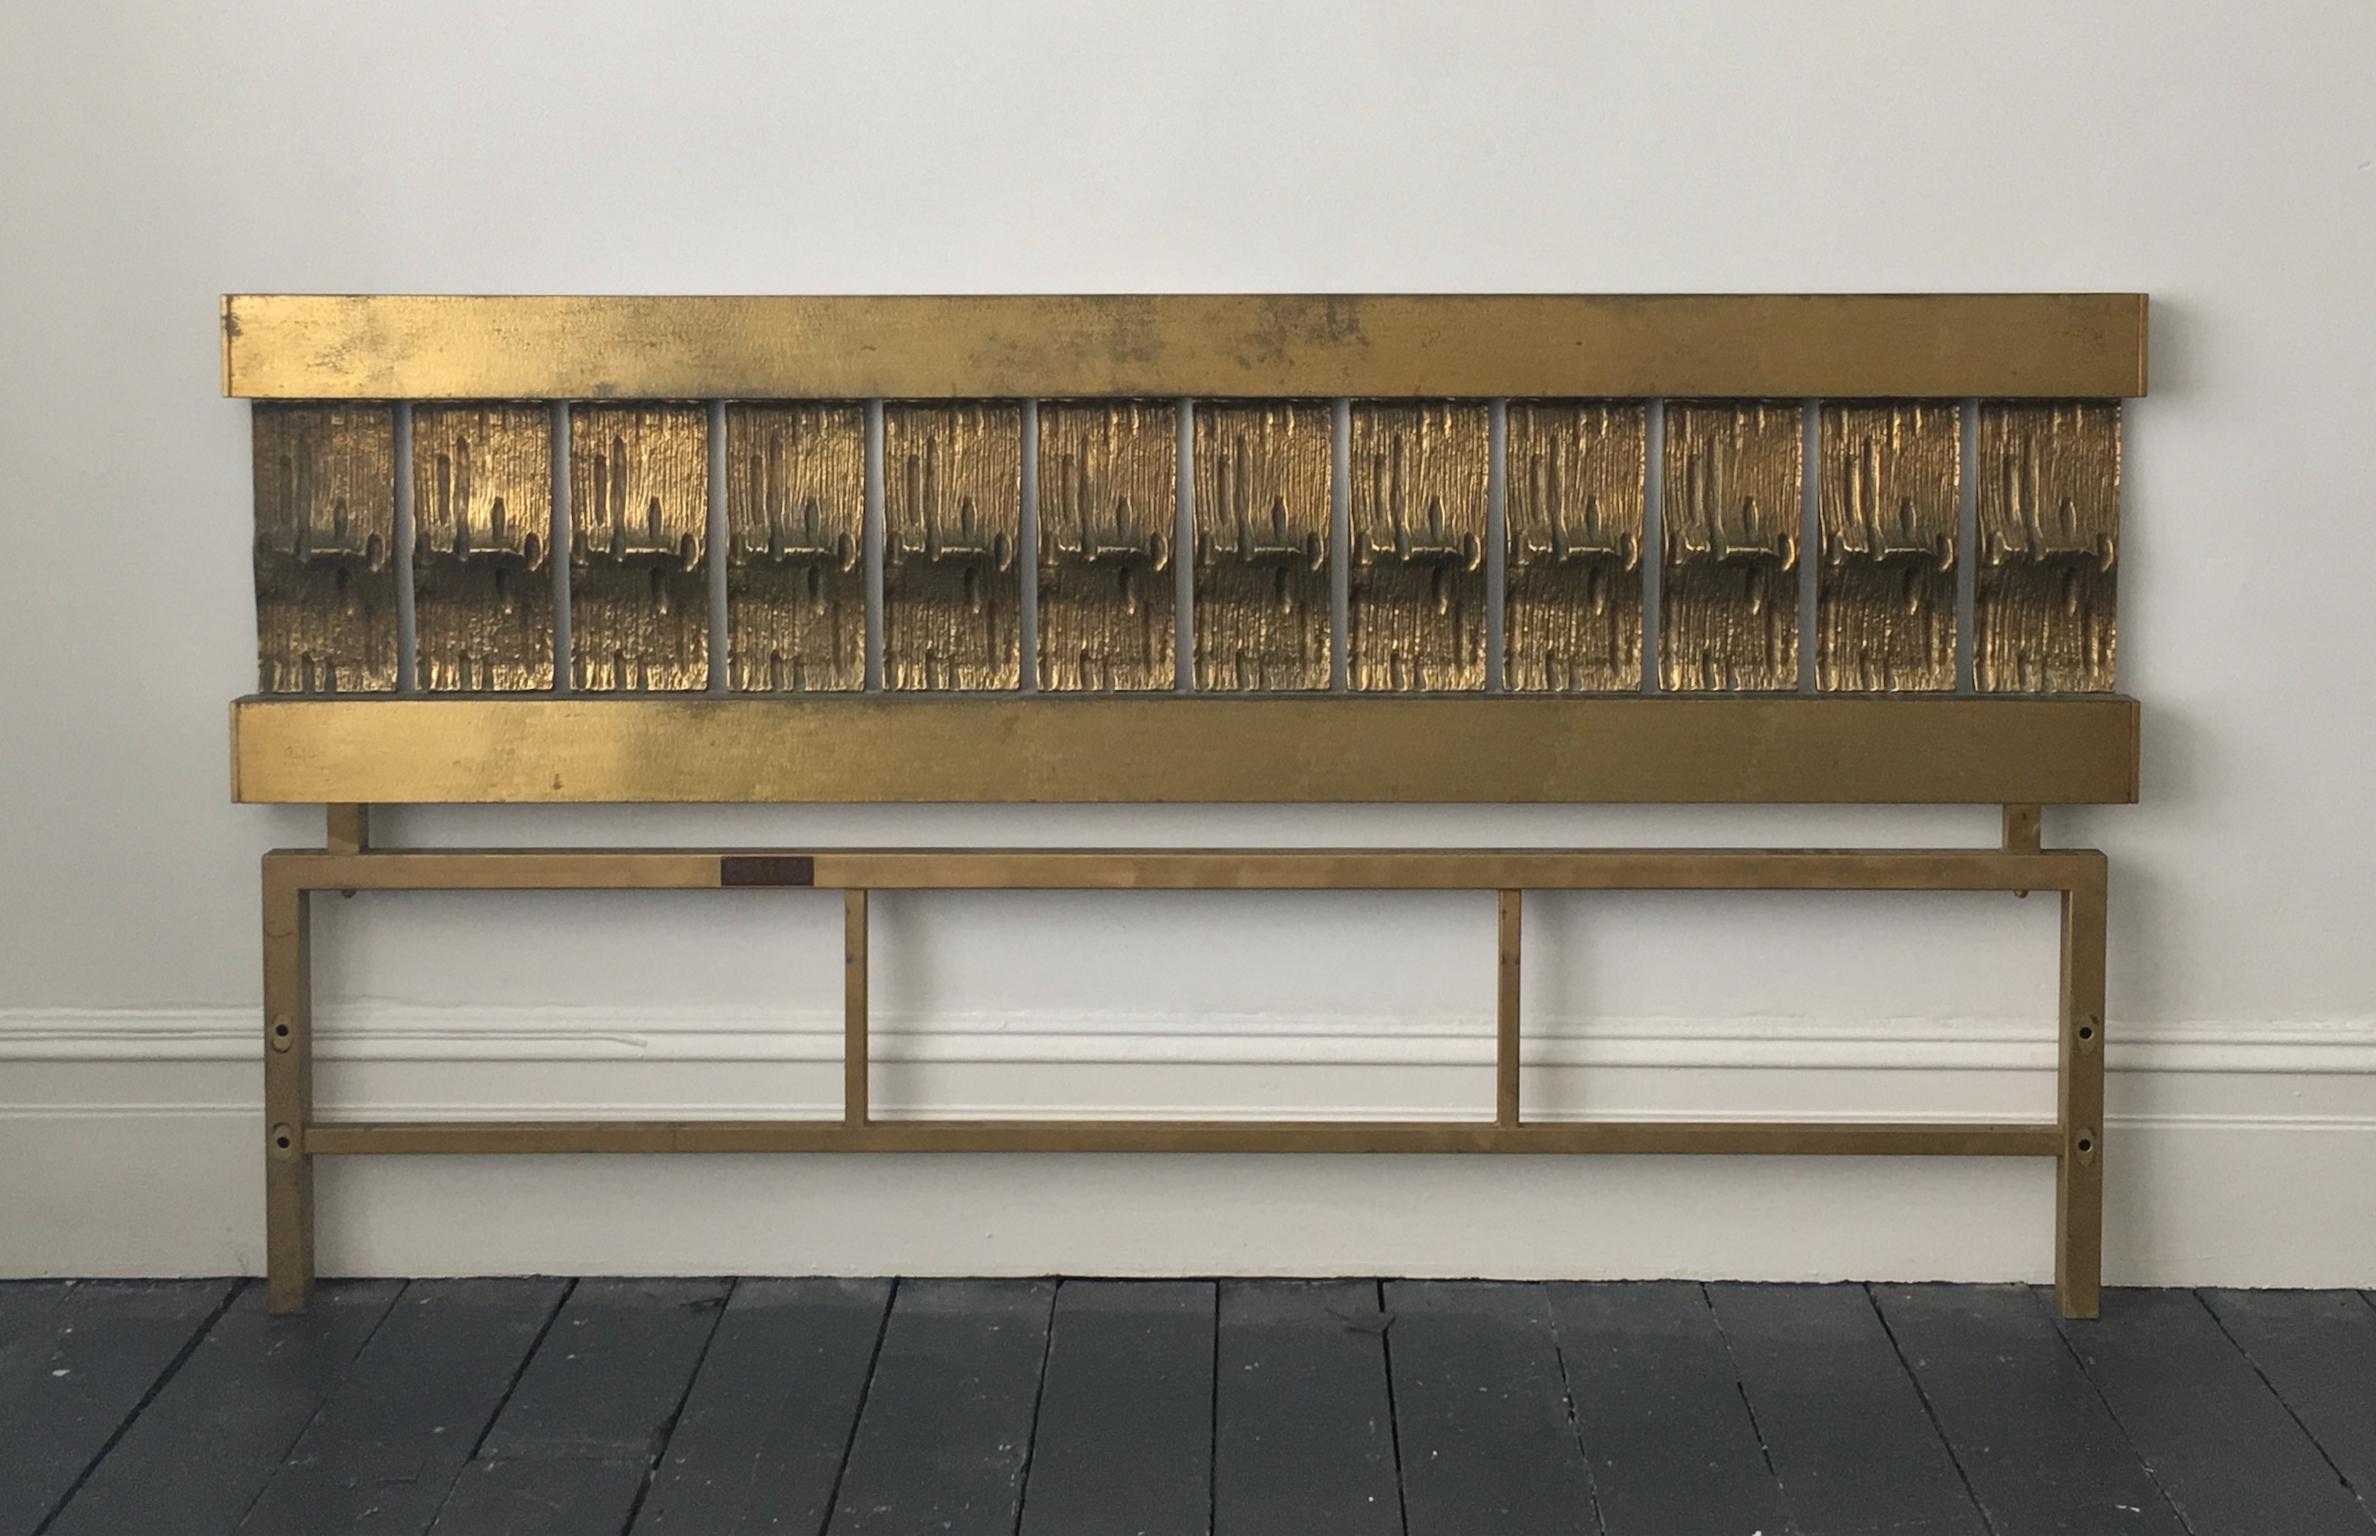 A headboard of cast and hammered brass, by Luciano Frigerio, Italy, mid-20th century.

This is a statement piece, with a simple block-like construction, which gives it a strong Brutalist feel. The upper section comprises two cross-bars with